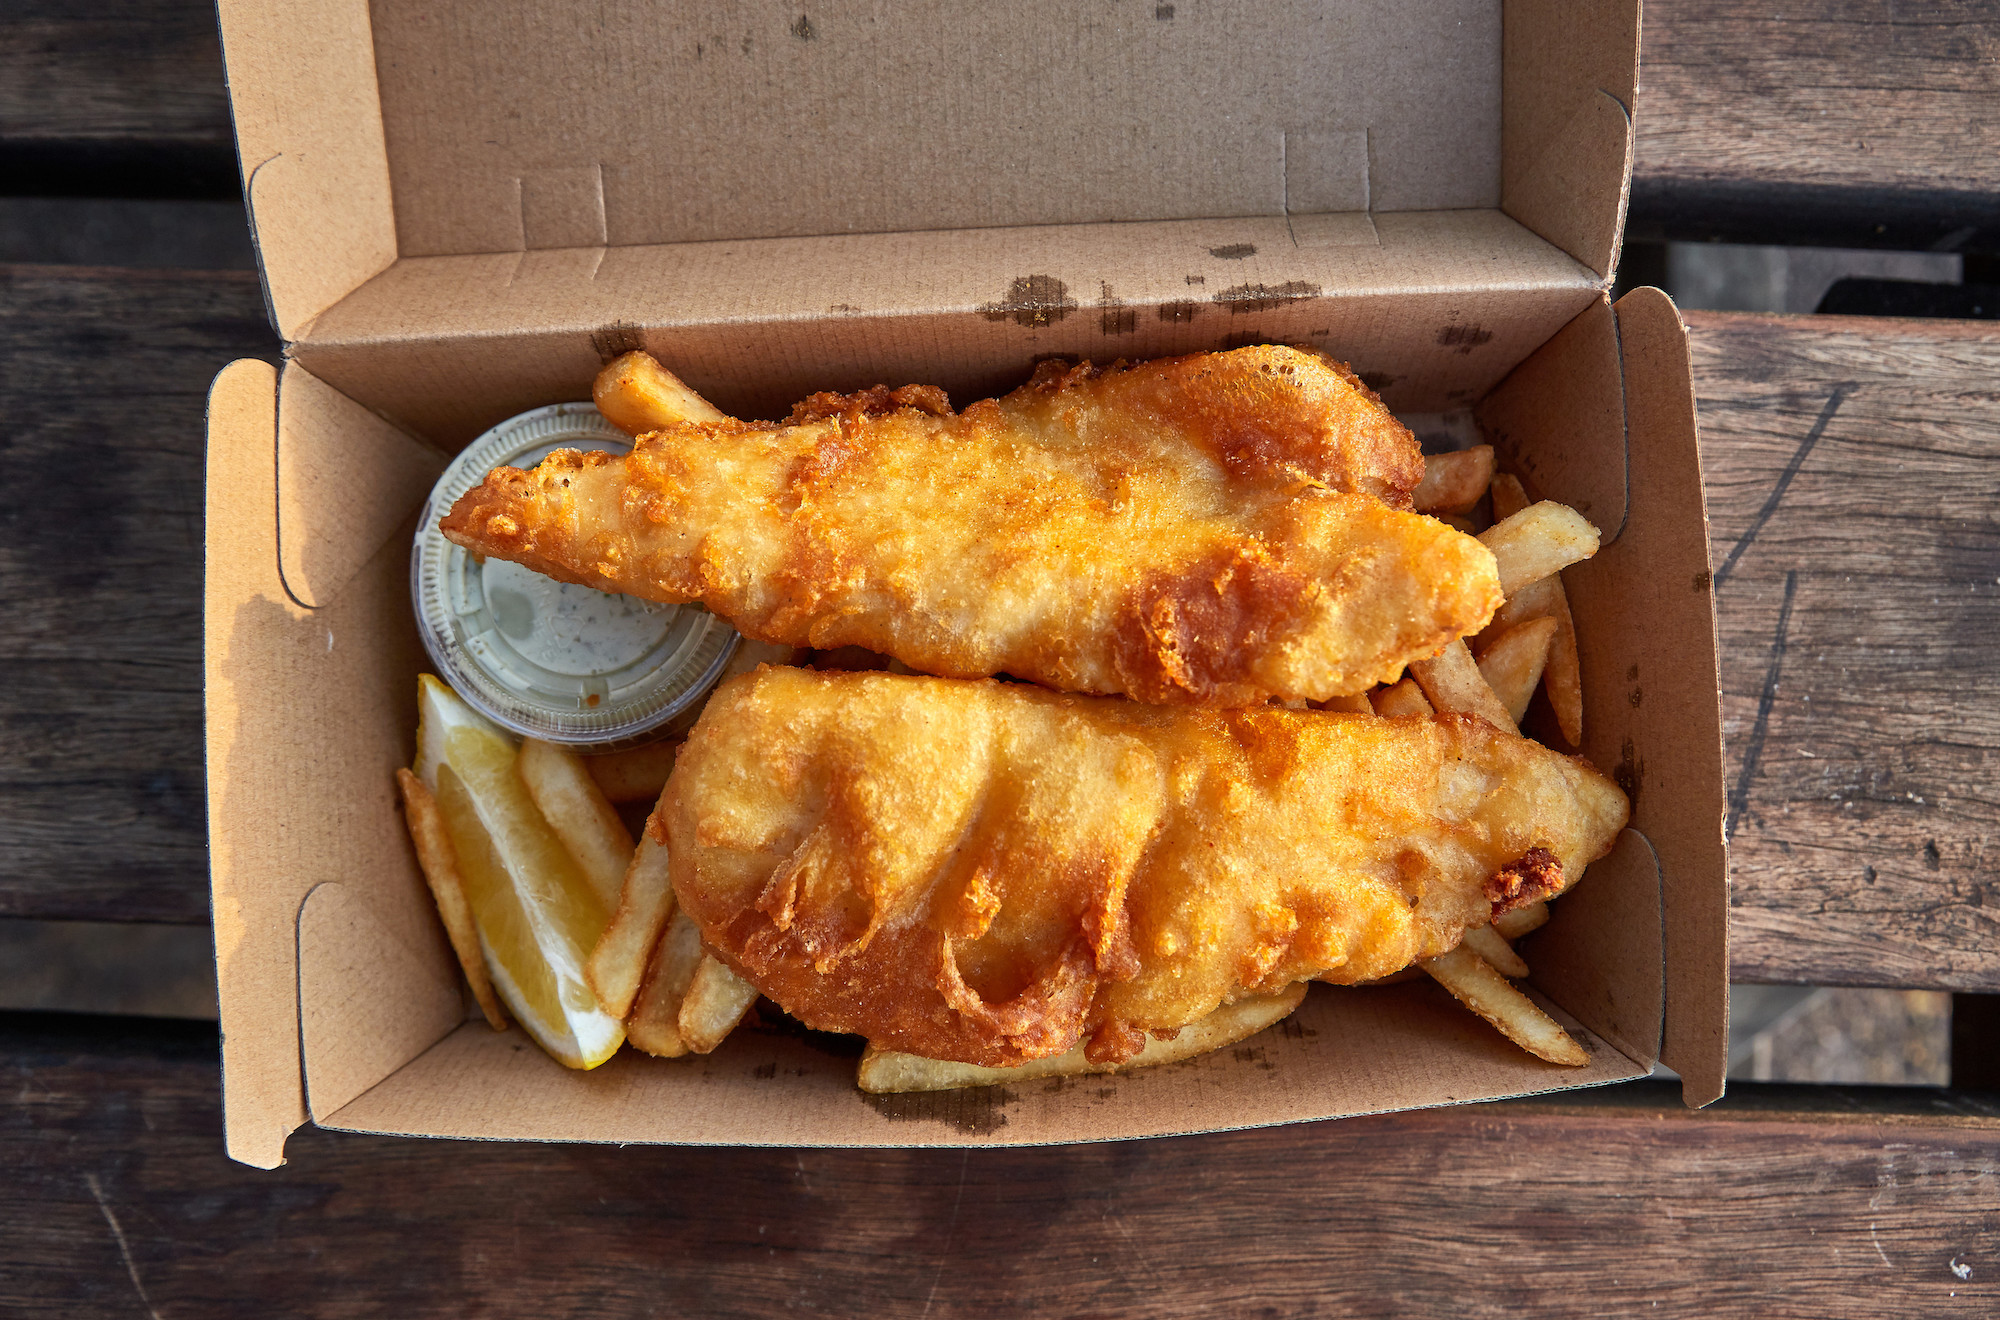 Fish and chips in a cardboard box.